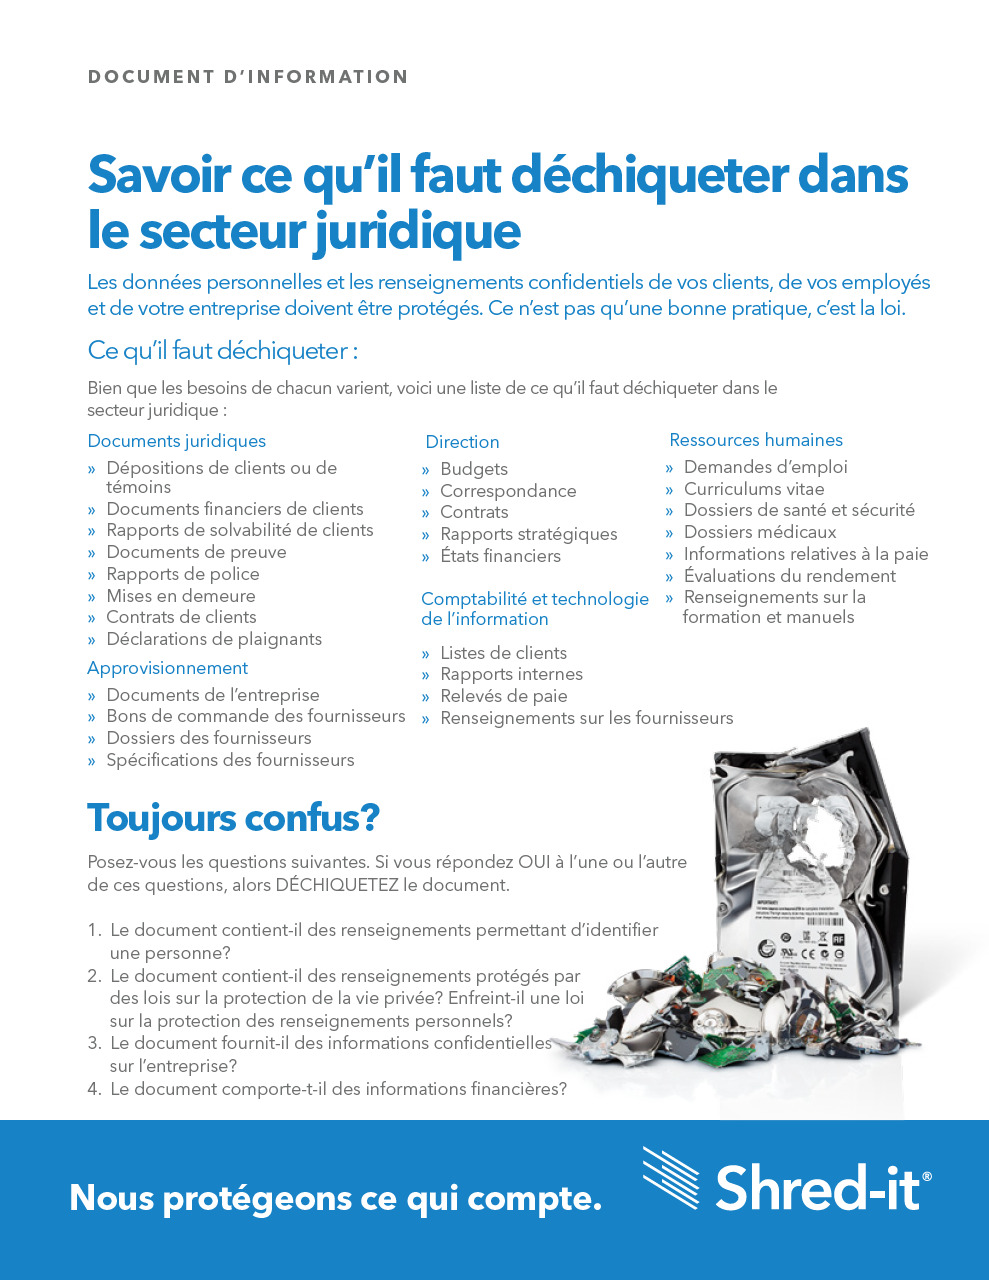 Shred-it-Knowing-What-to-Shred-Legal-French.pdf